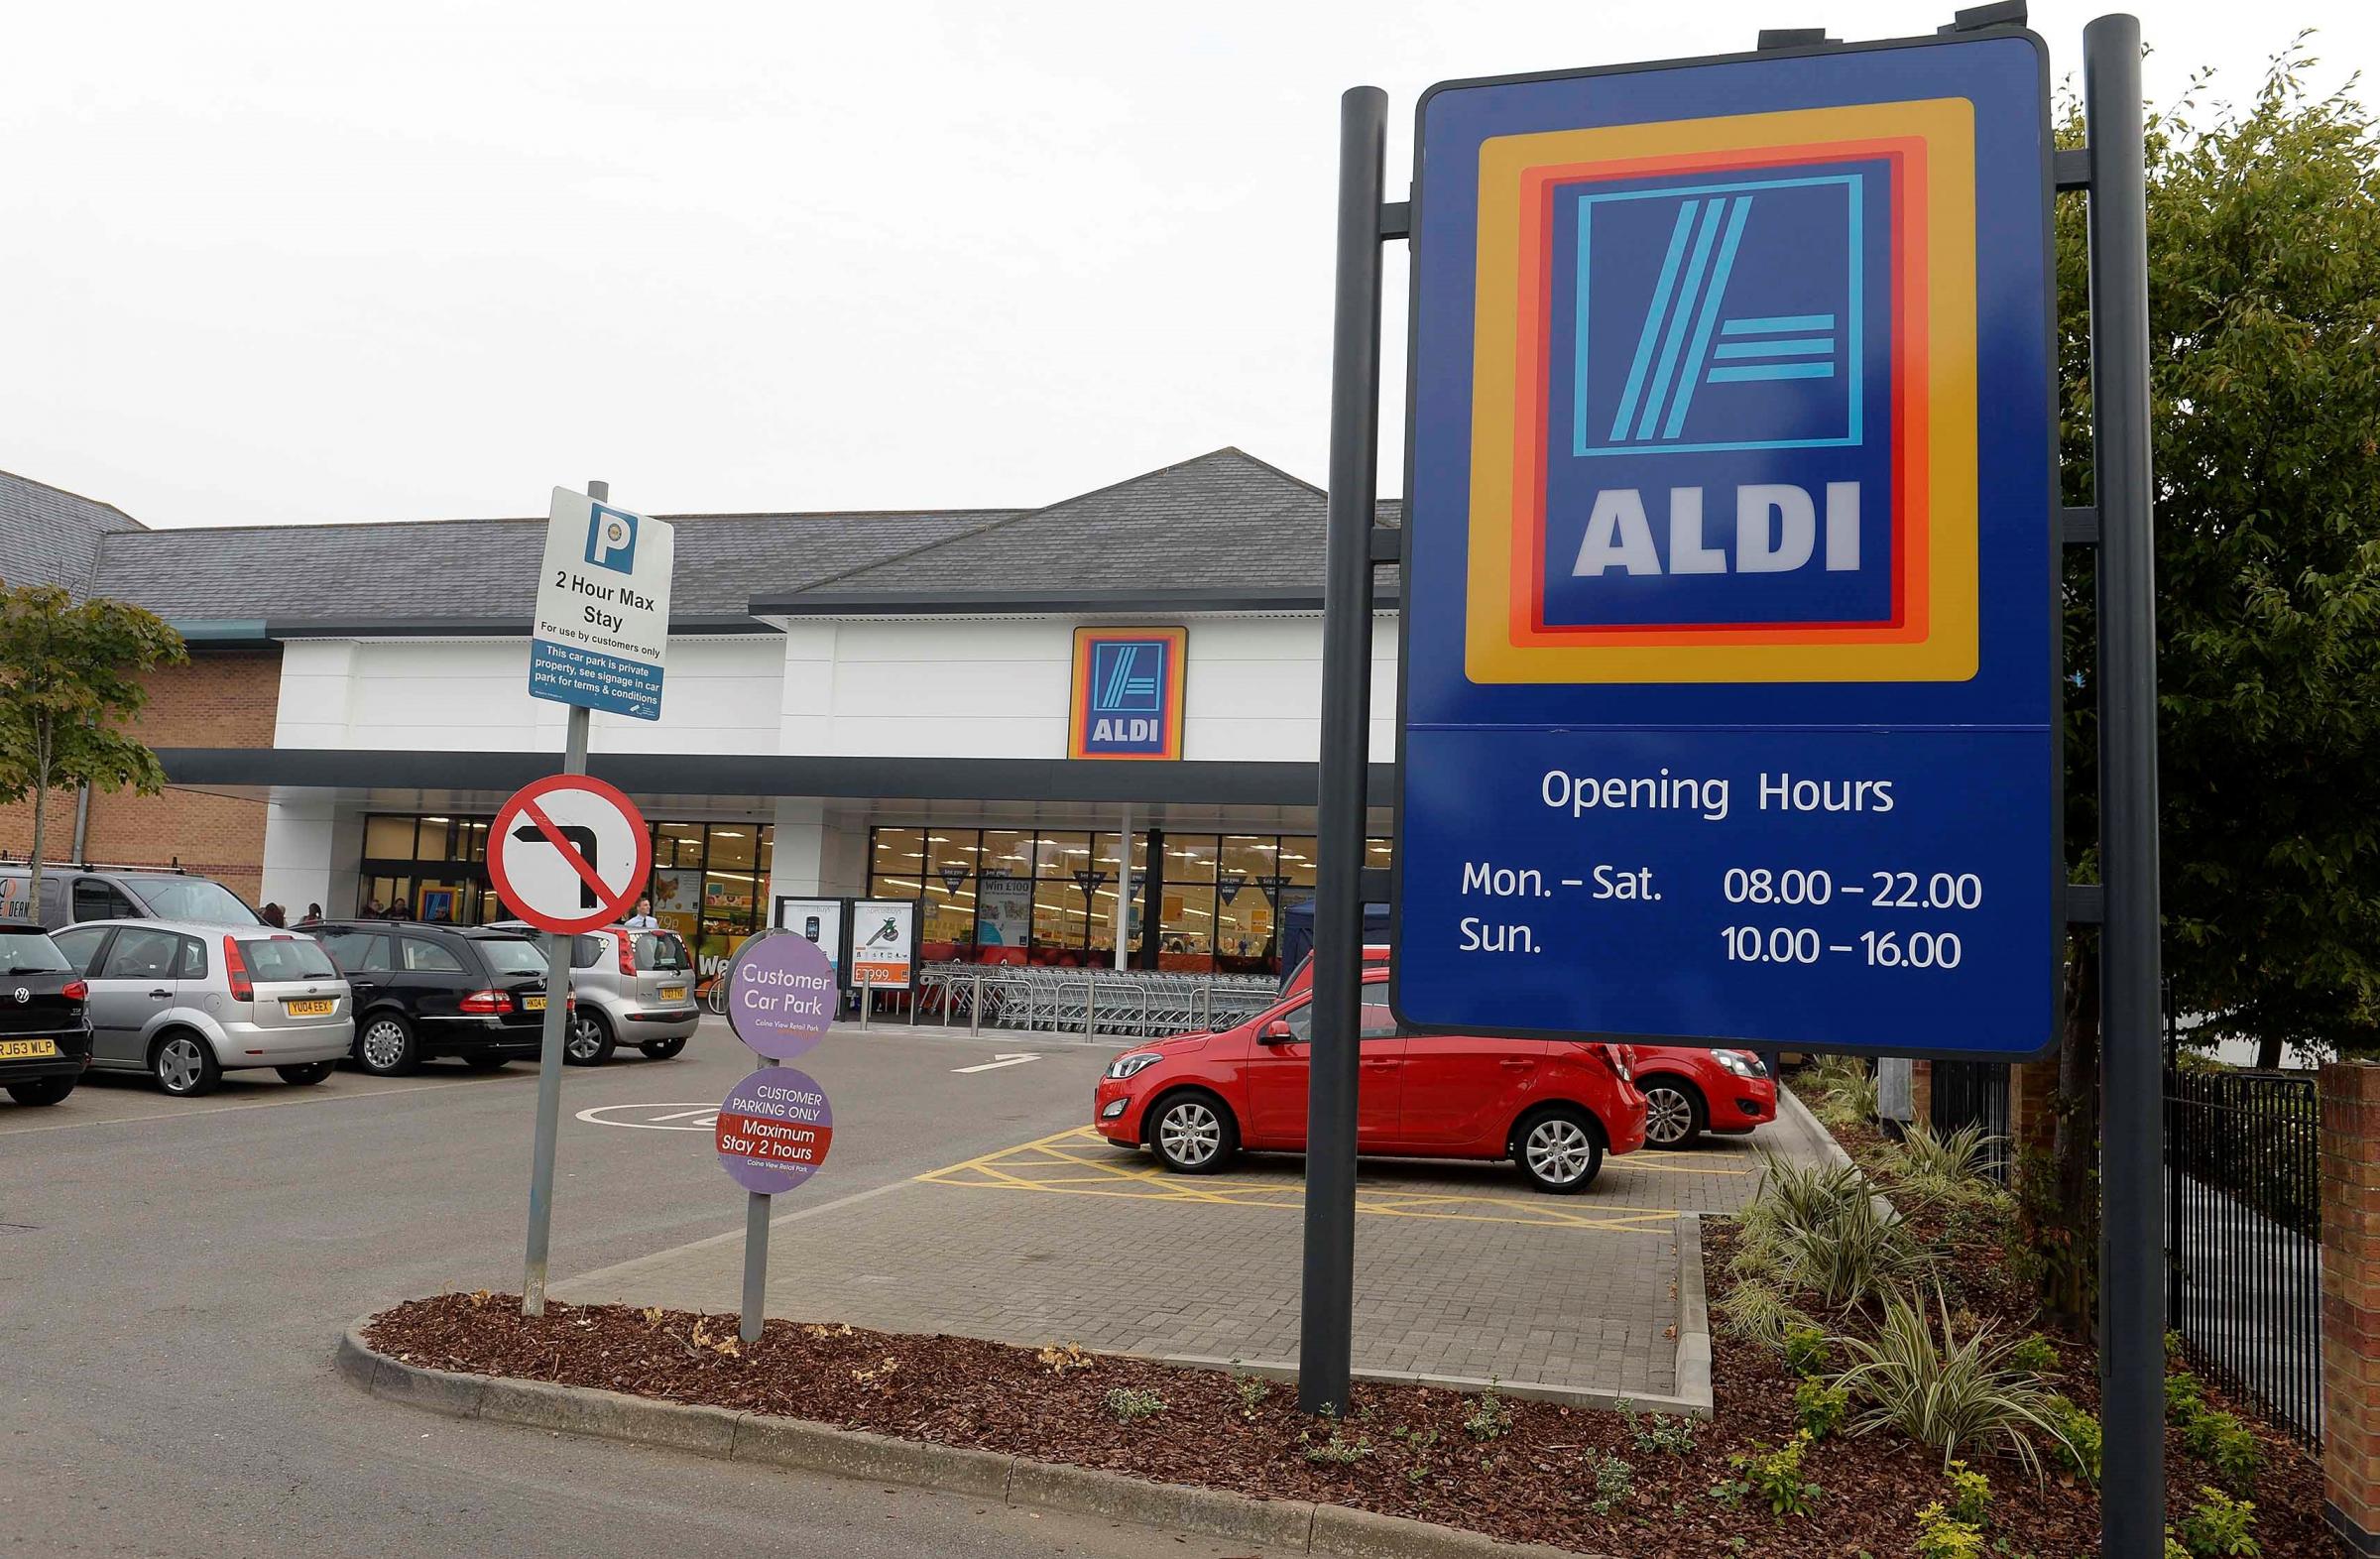 New Aldi store in Cowdray Avenue, Colchester, officially opened by Col Town mayor Julie Young and Gold medal winning sailor Saskia Clark.